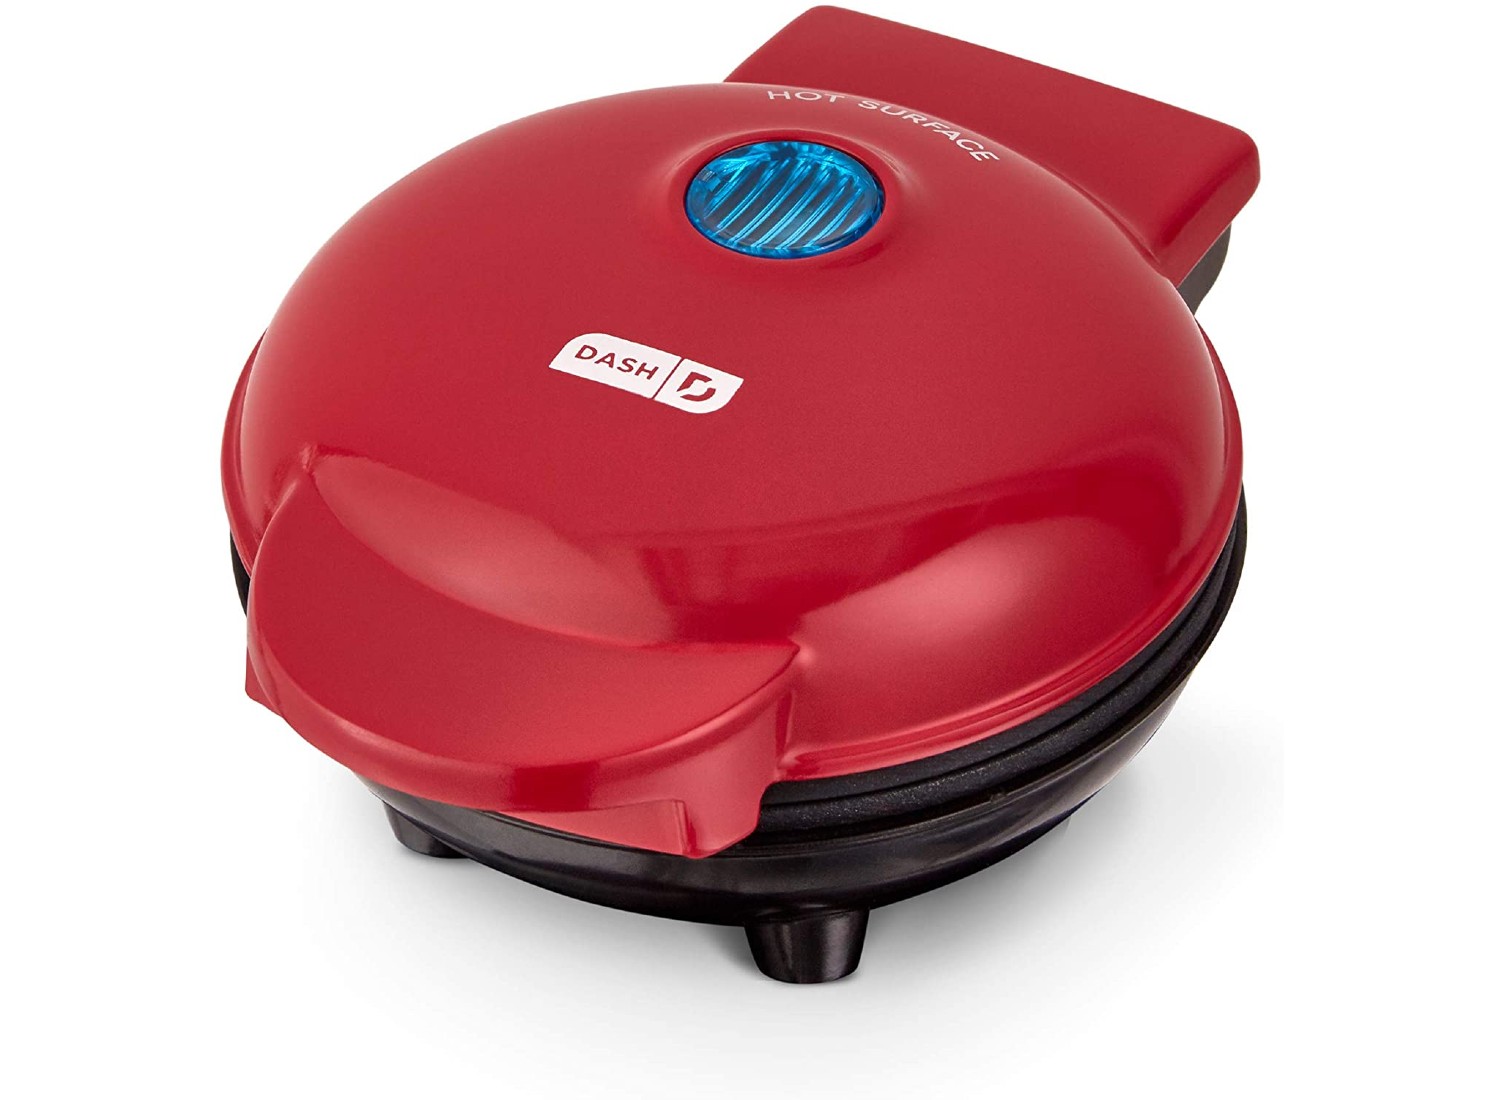 This Breakfast Sandwich Maker Has Tons of Great Reviews on